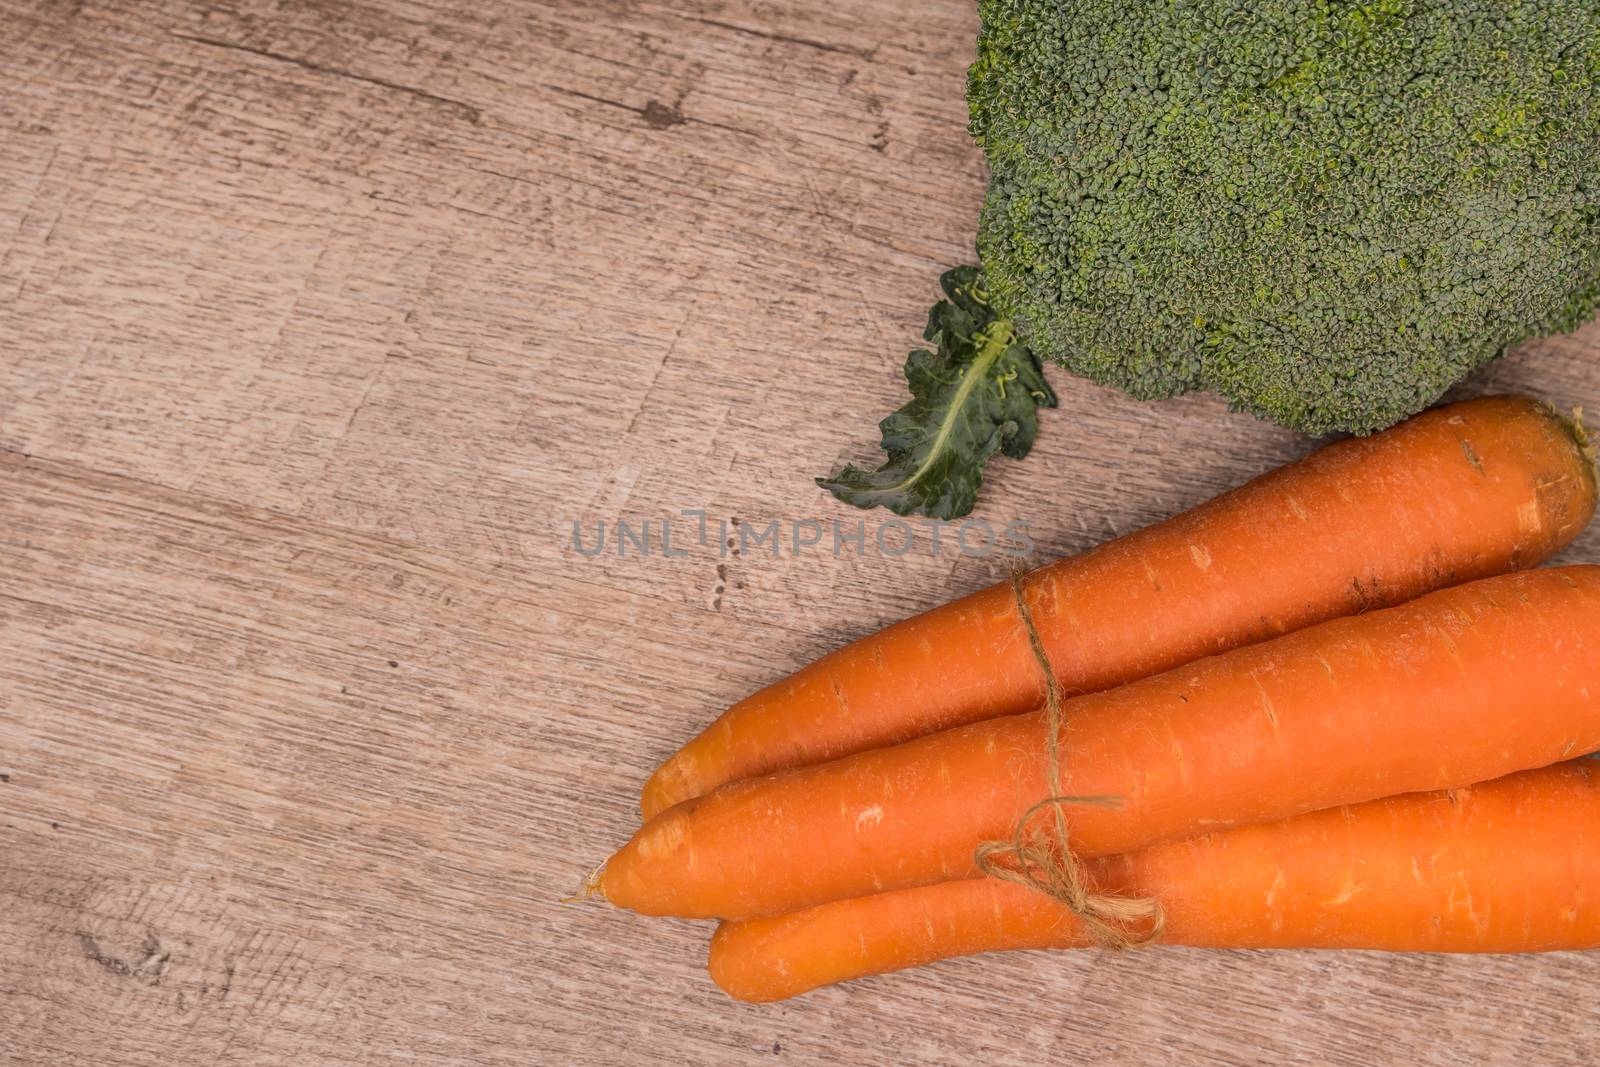 Fresh vegetables from the garden, carrots and broccoli on a wooden table. Vegetables for preparing soup